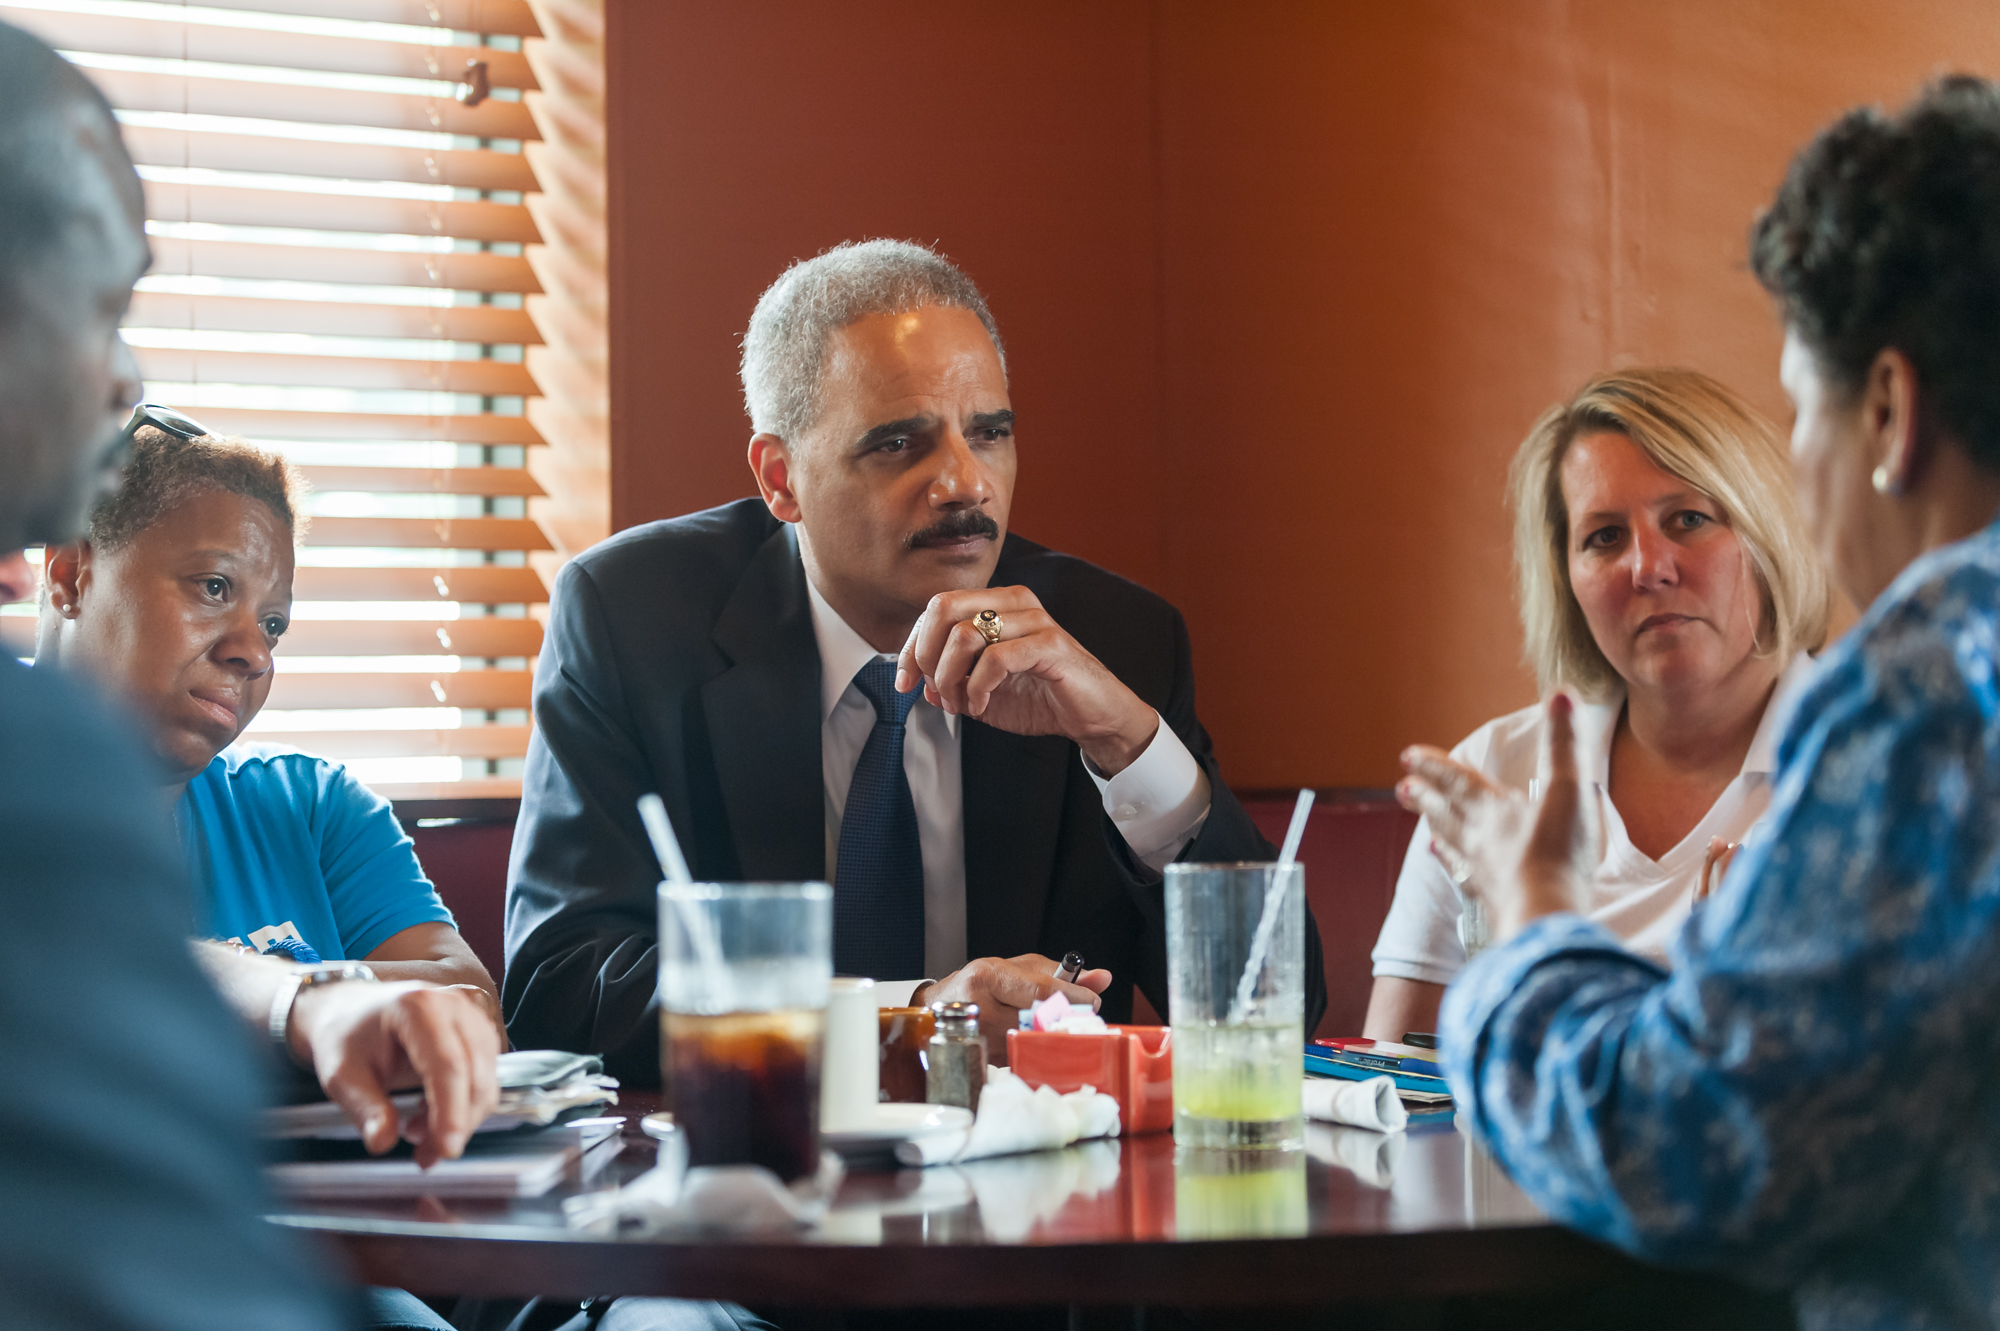 Attorney General Holder meets with local residents and community leaders of Ferguson at Drake’s Place Restaurant